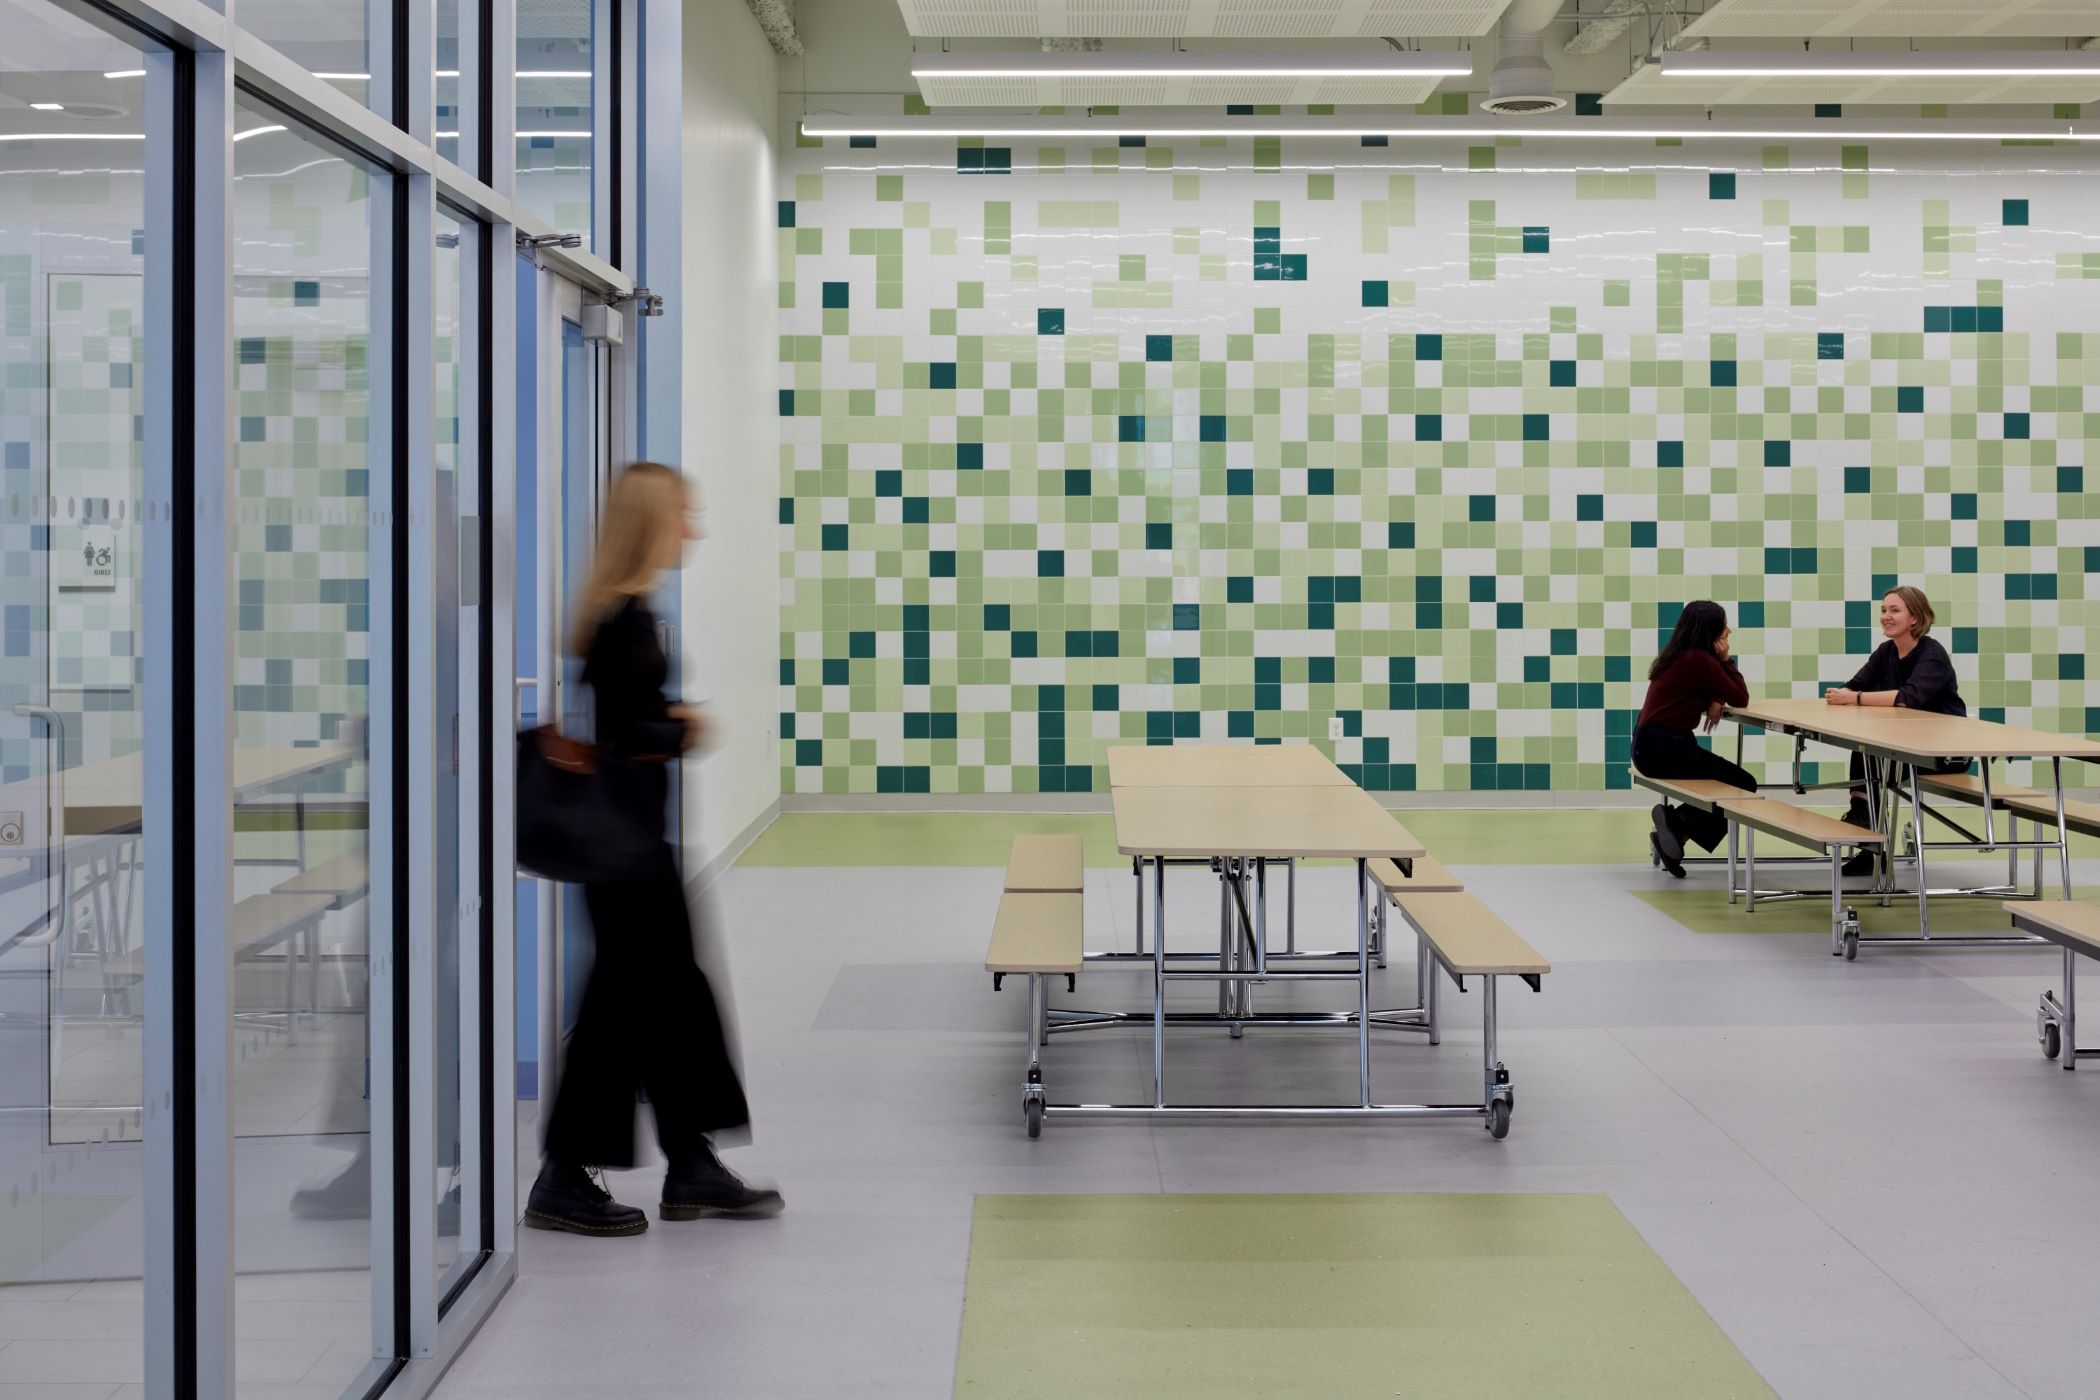 Teachers in the cafeteria with square design on wall